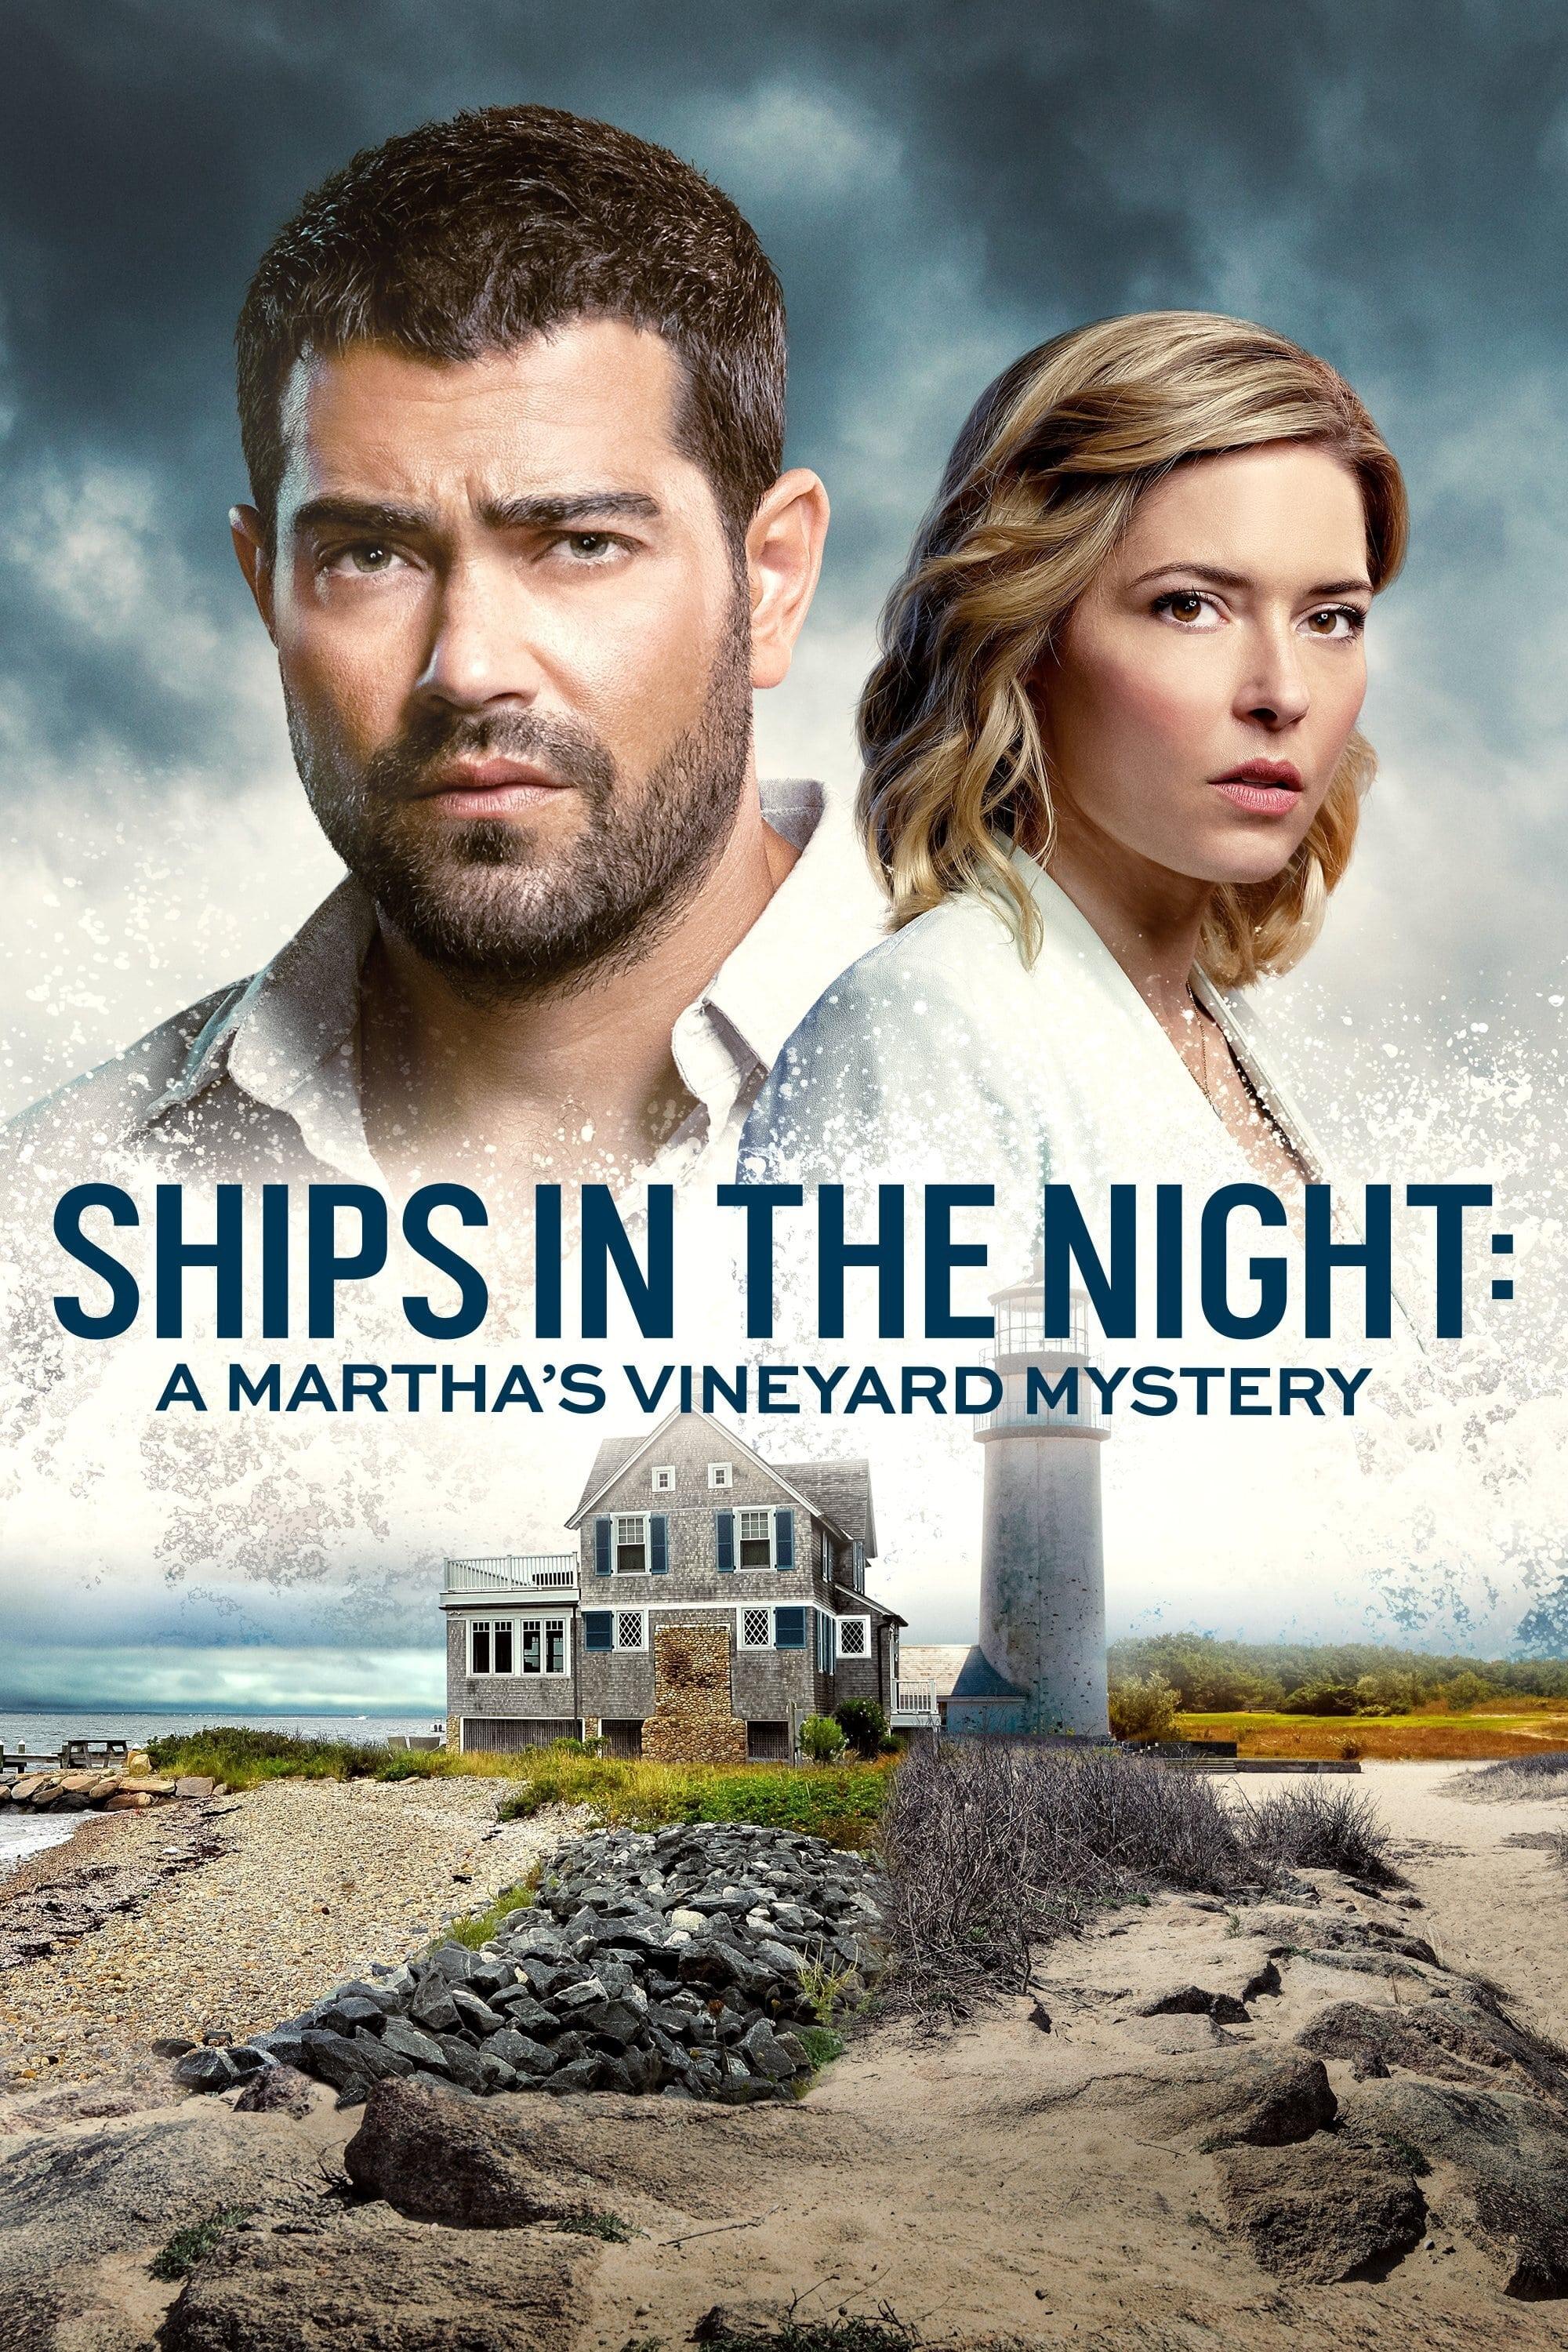 Ships in the Night: A Martha's Vineyard Mystery poster